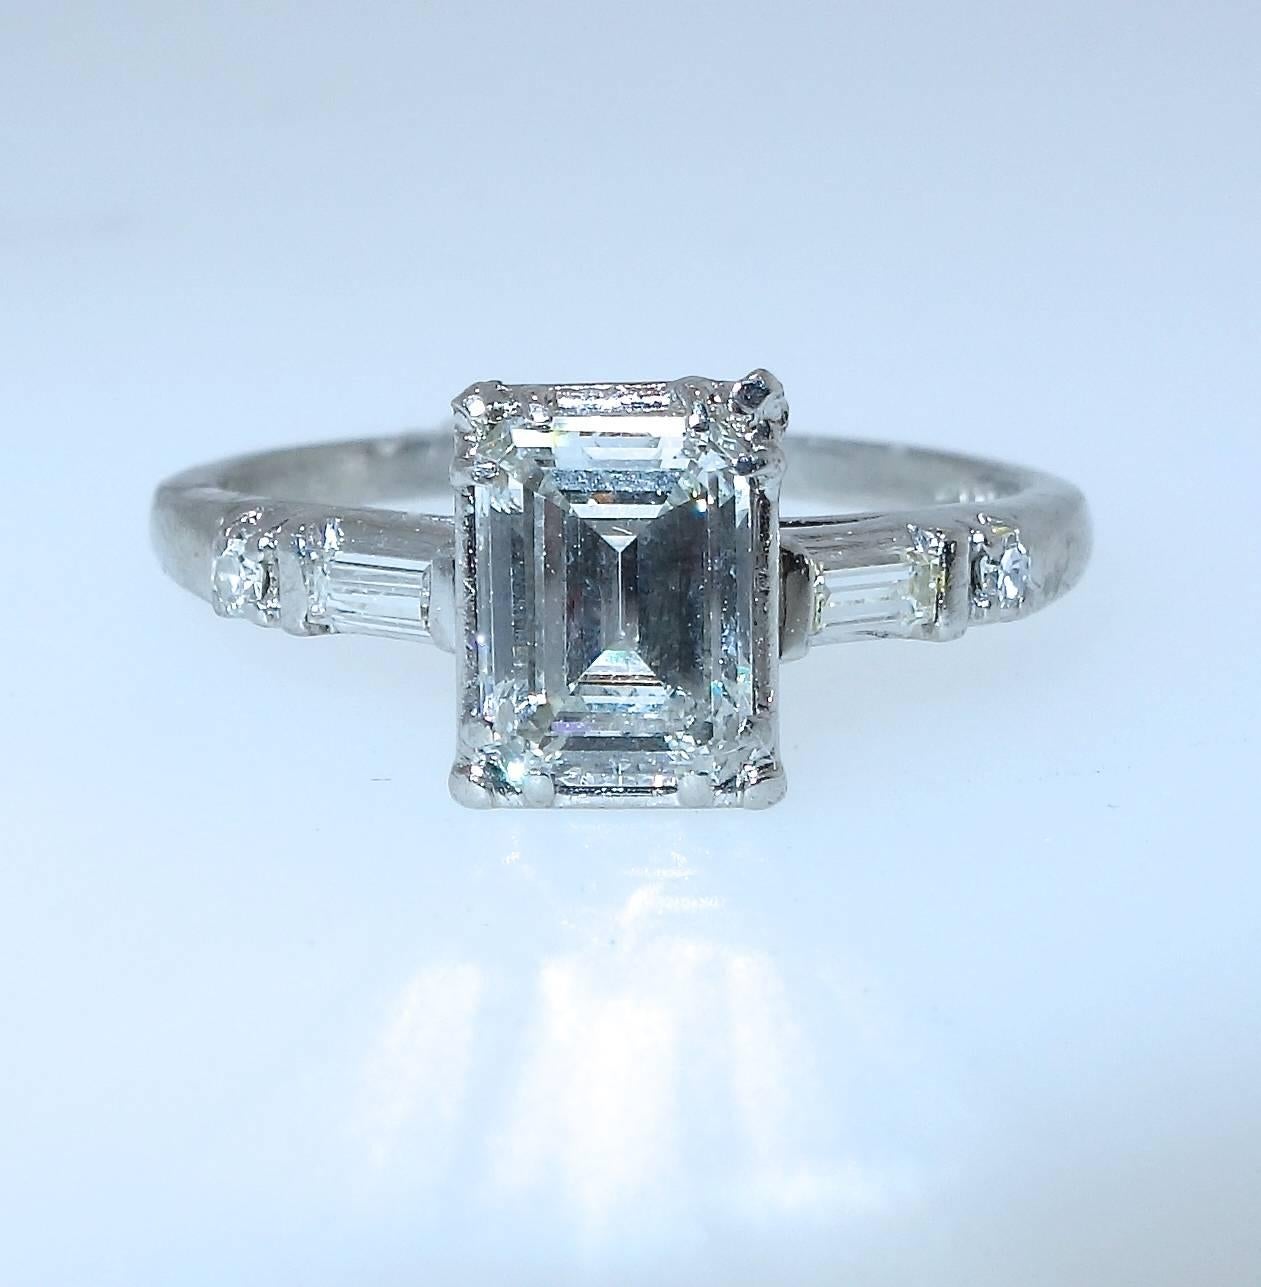 The handmade platinum mounting centers an emerald cut diamond.  Color H/I, and clarity VS2.  This well cut stone weighs 1.0 cts., and is accented with a round and baguette cut diamond on either side.  The total diamond weight is approximately 1.15